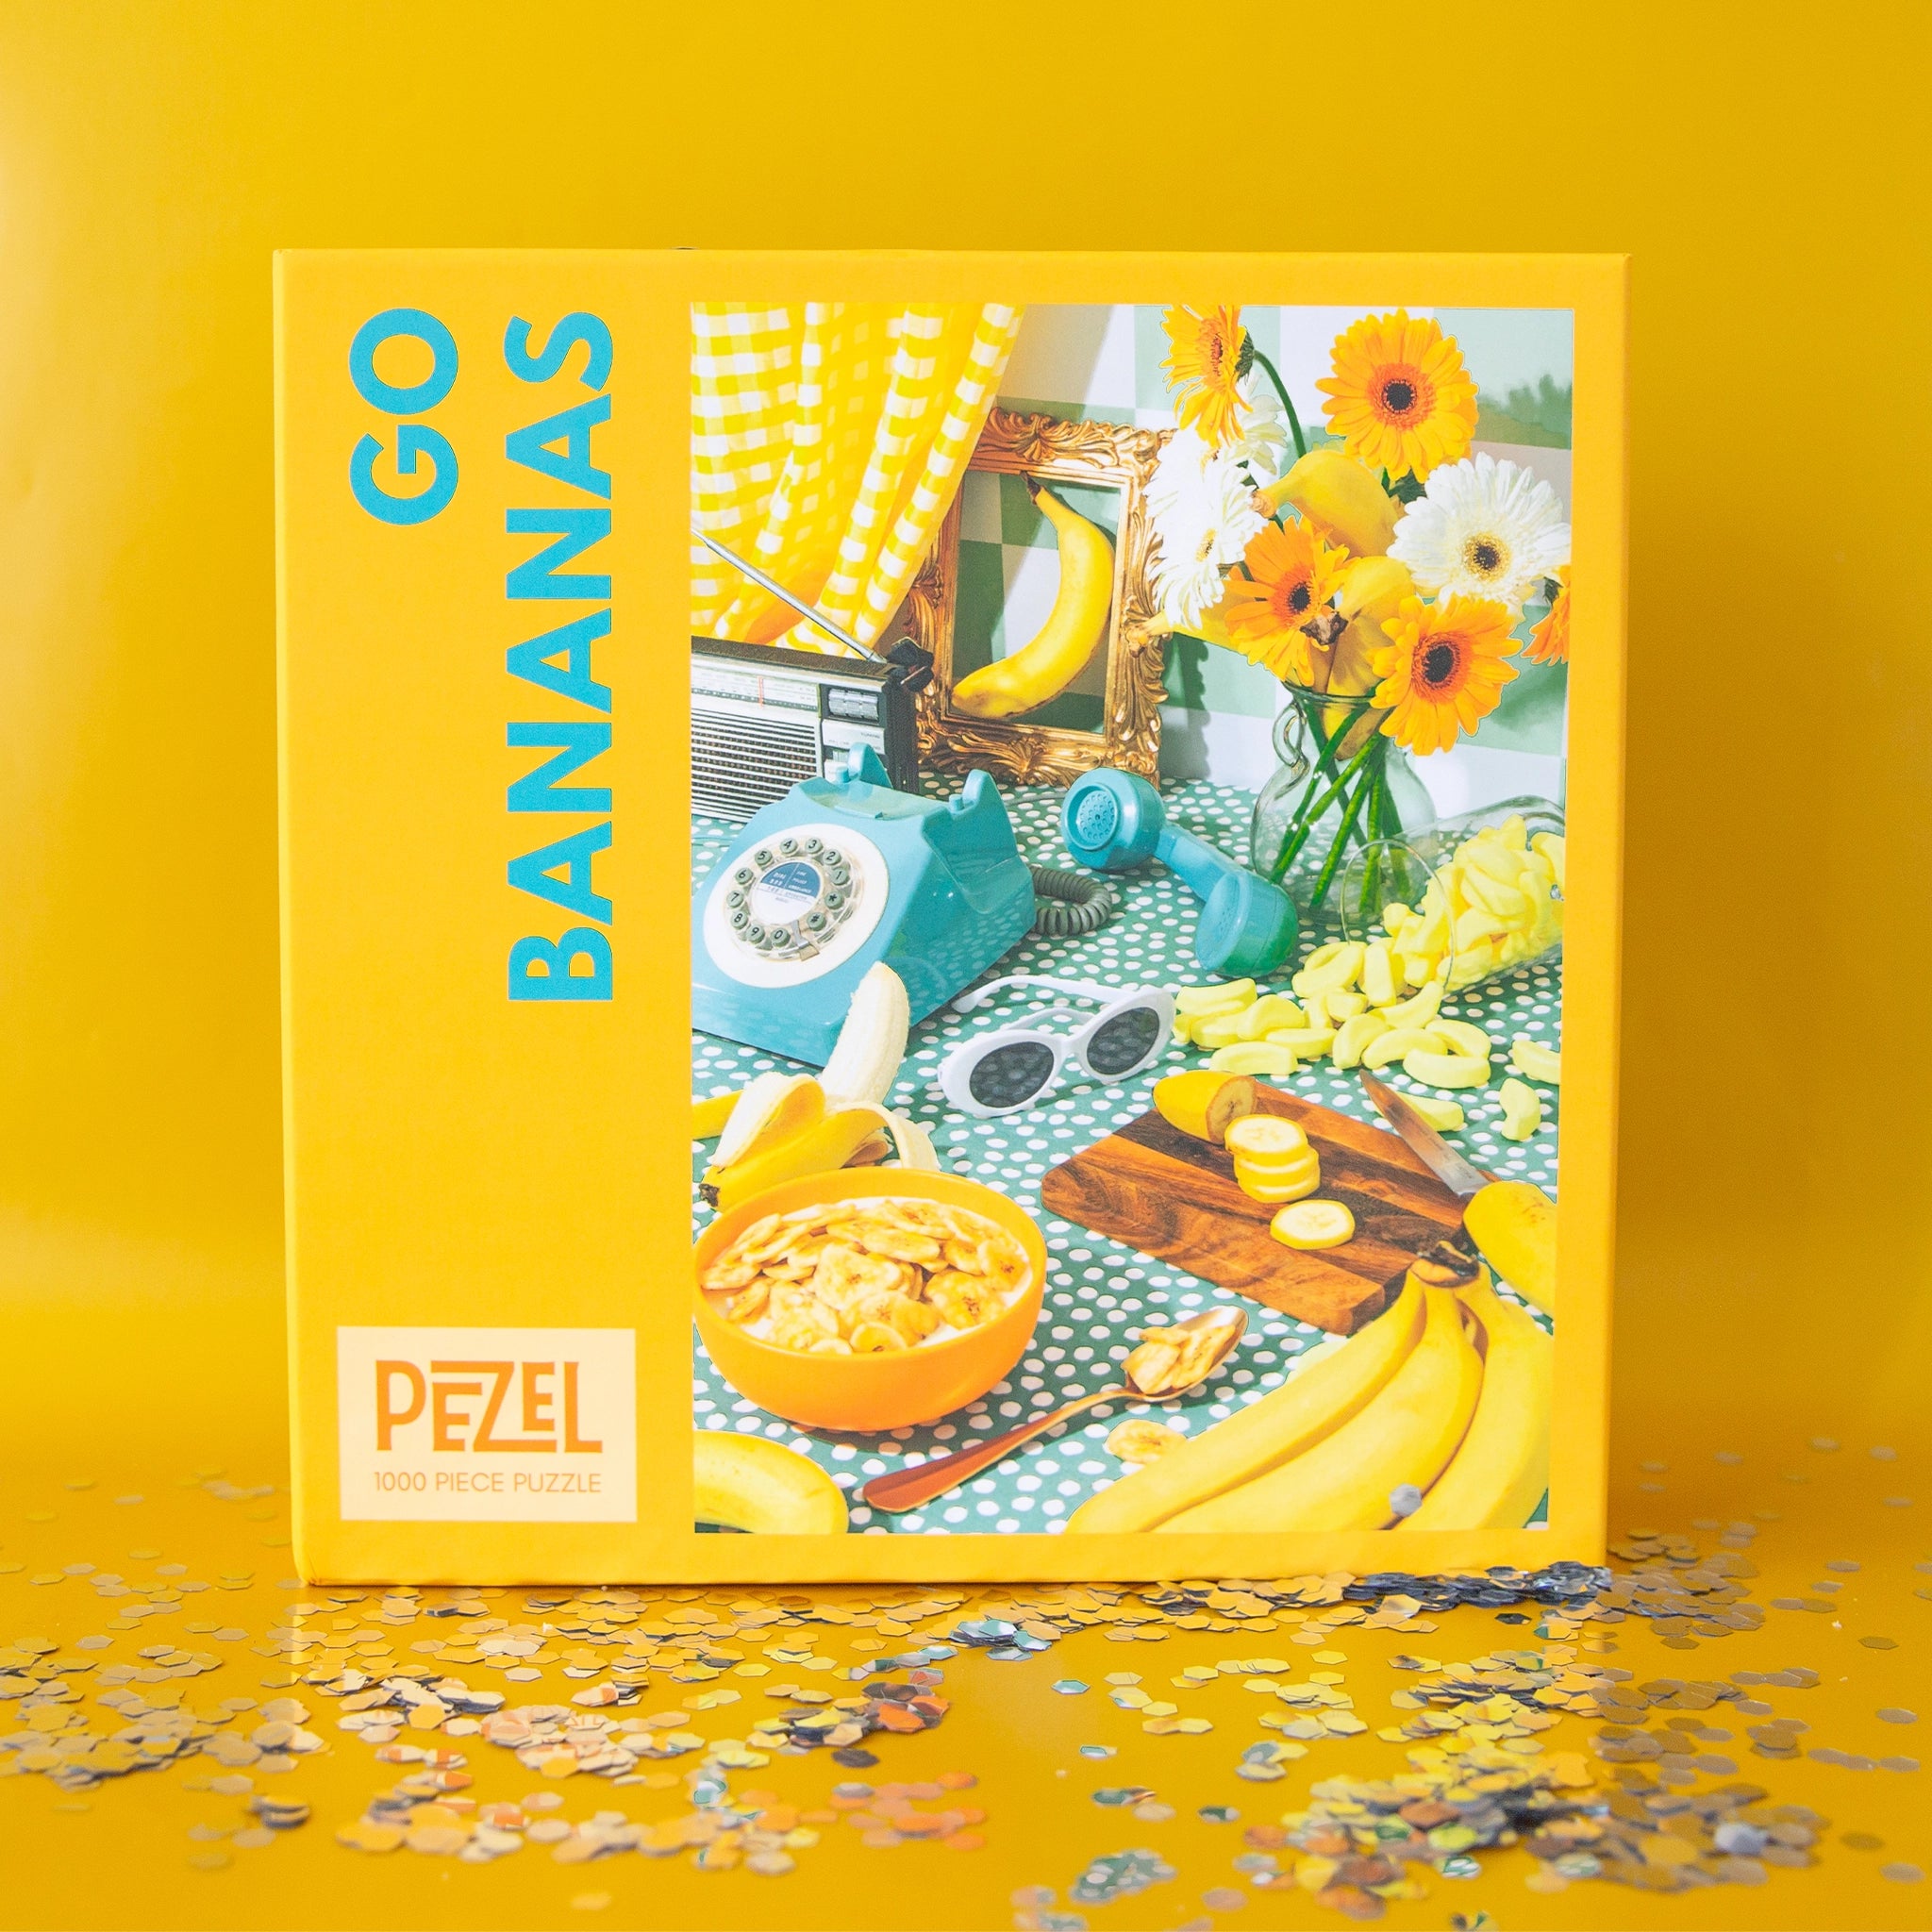 On a yellow background is a red and blue puzzle box ghat reads, "Go Bananas" with a photo on the side of what the puzzle looks like finished which is a retro table scape with bananas a vintage touch dial phone yellow flowers and white oval sunglasses. 